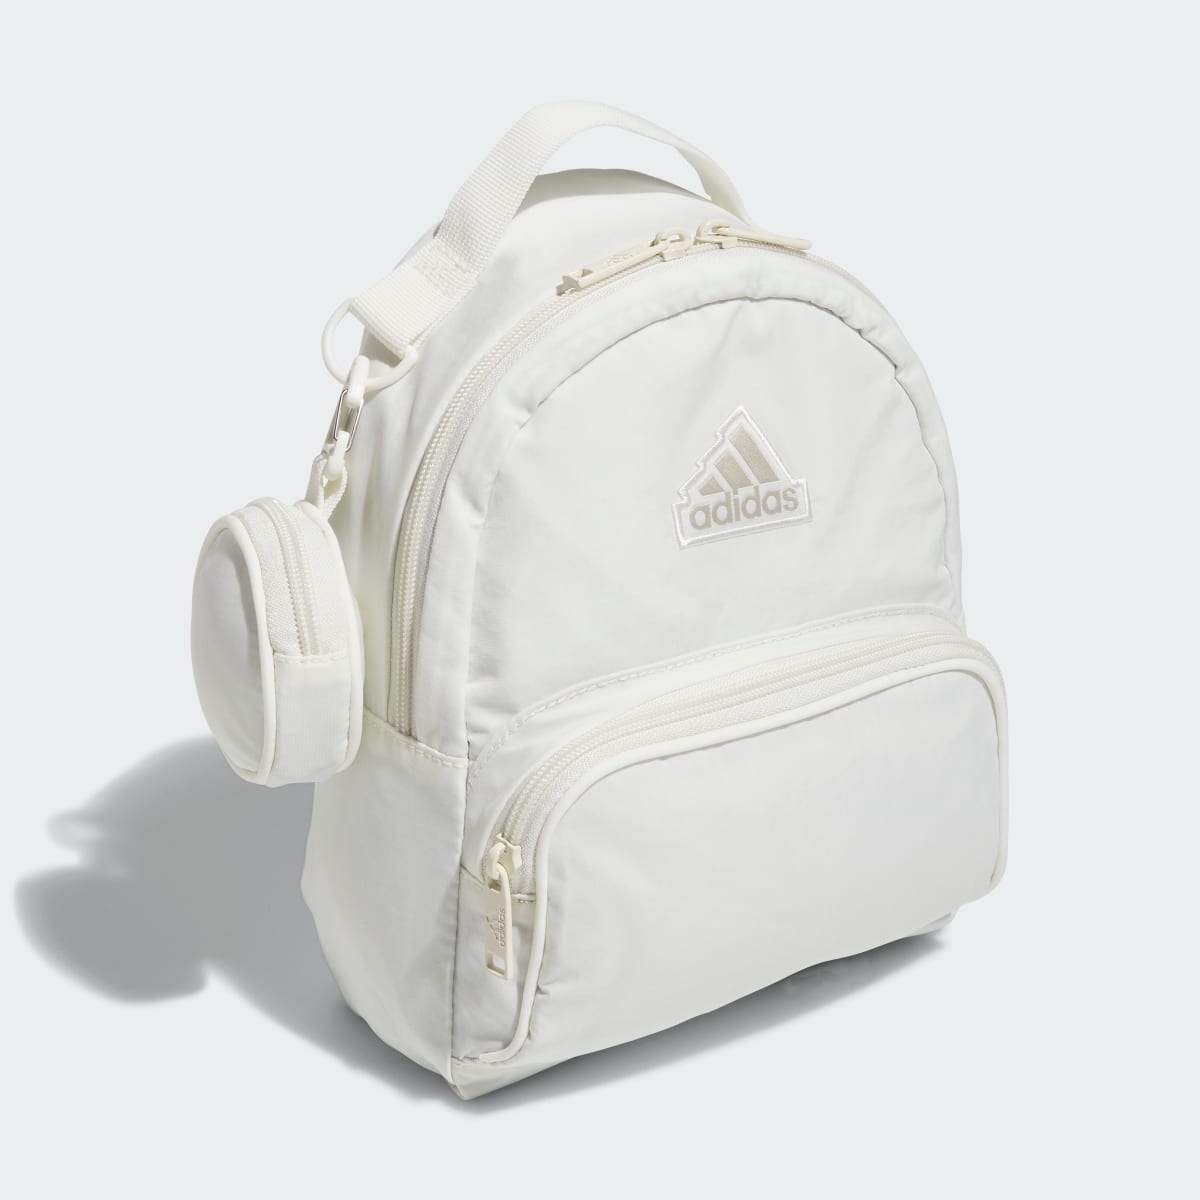 Adidas Must-Have Mini Backpack. 4